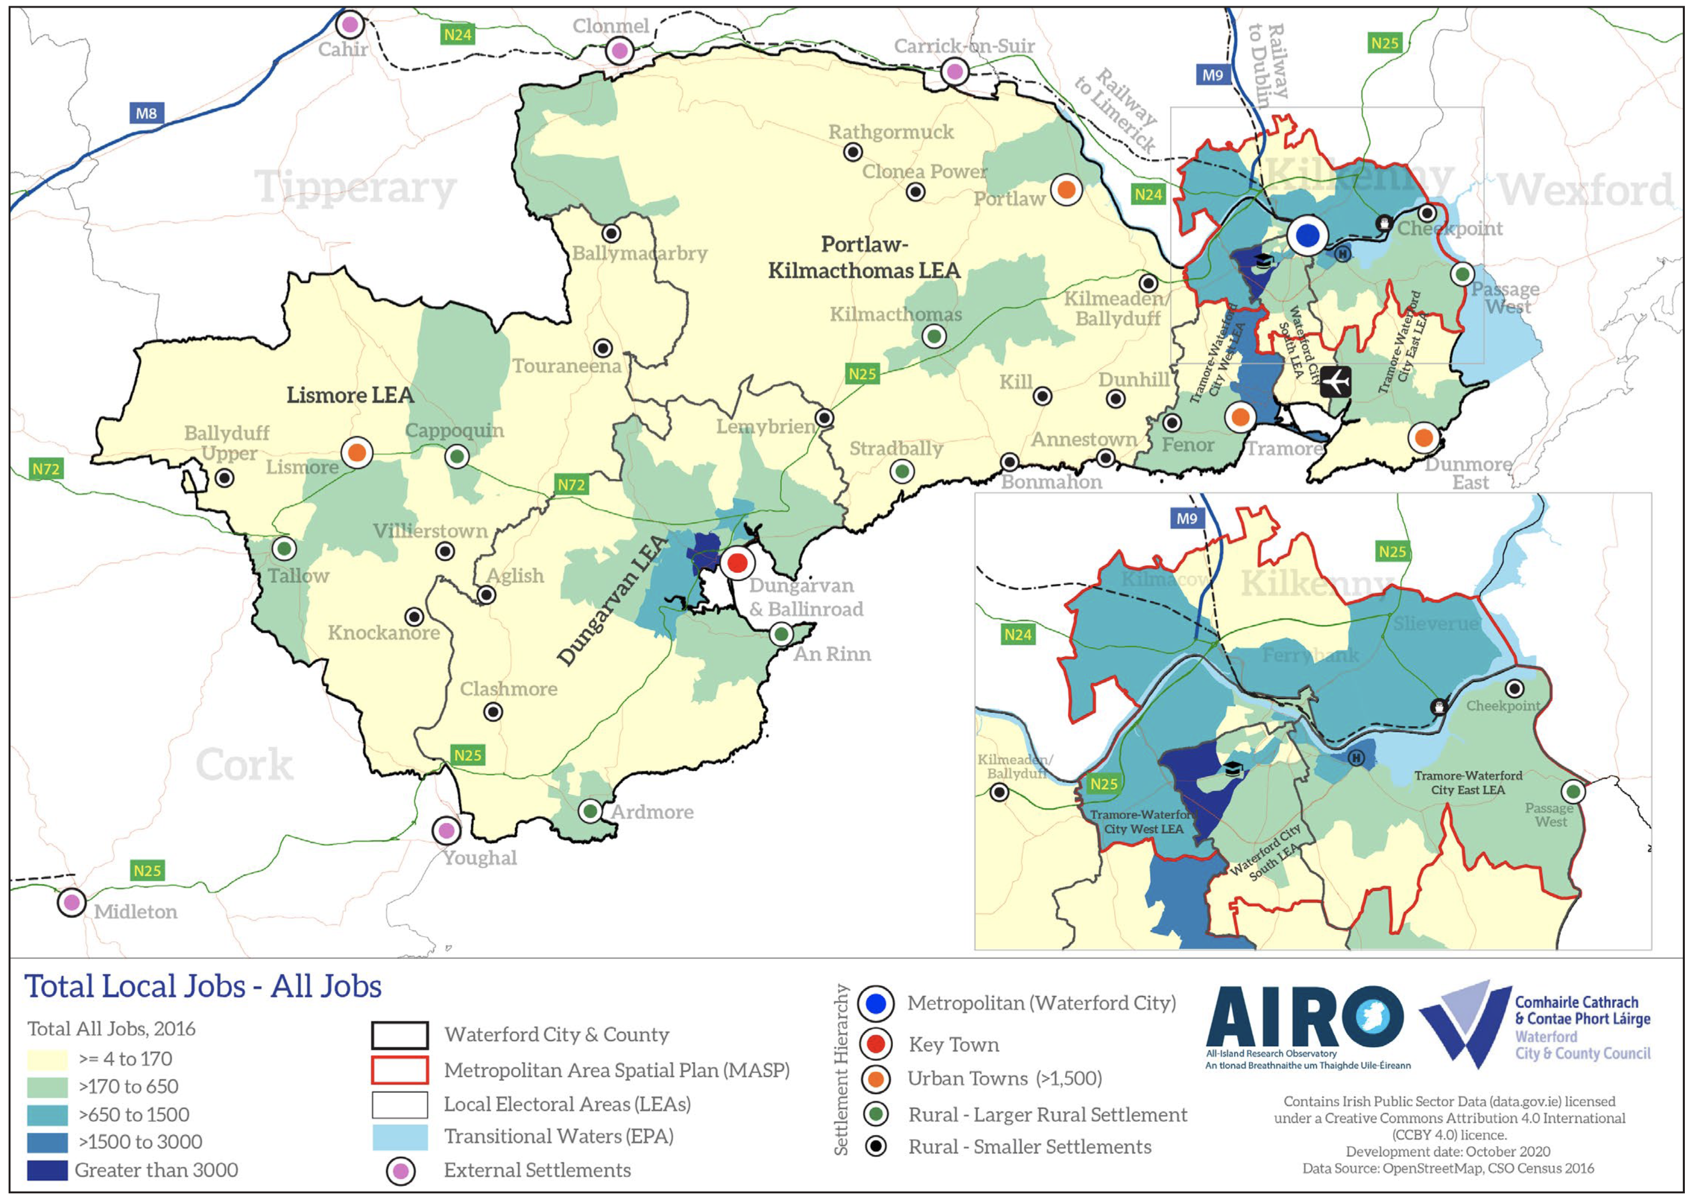 Maps of Location of Jobs in Waterford